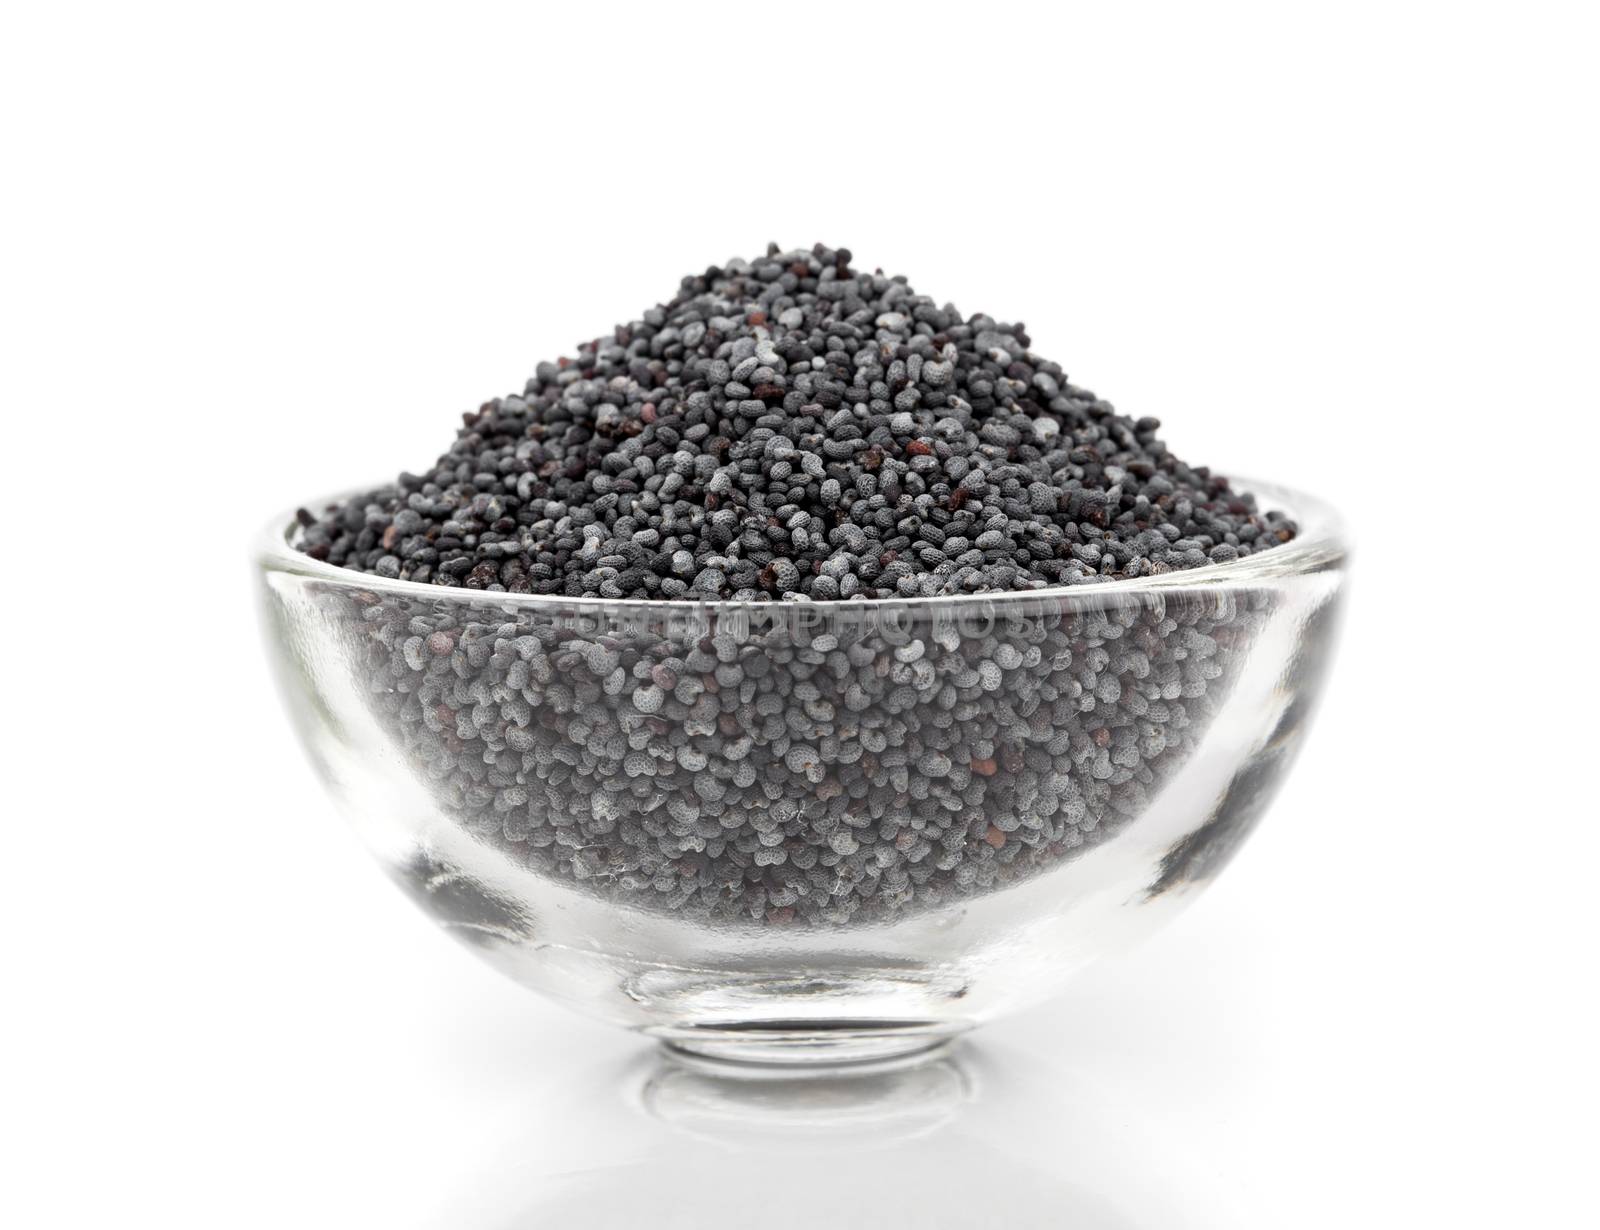 poppy seeds in a glass bowl isolated on white background